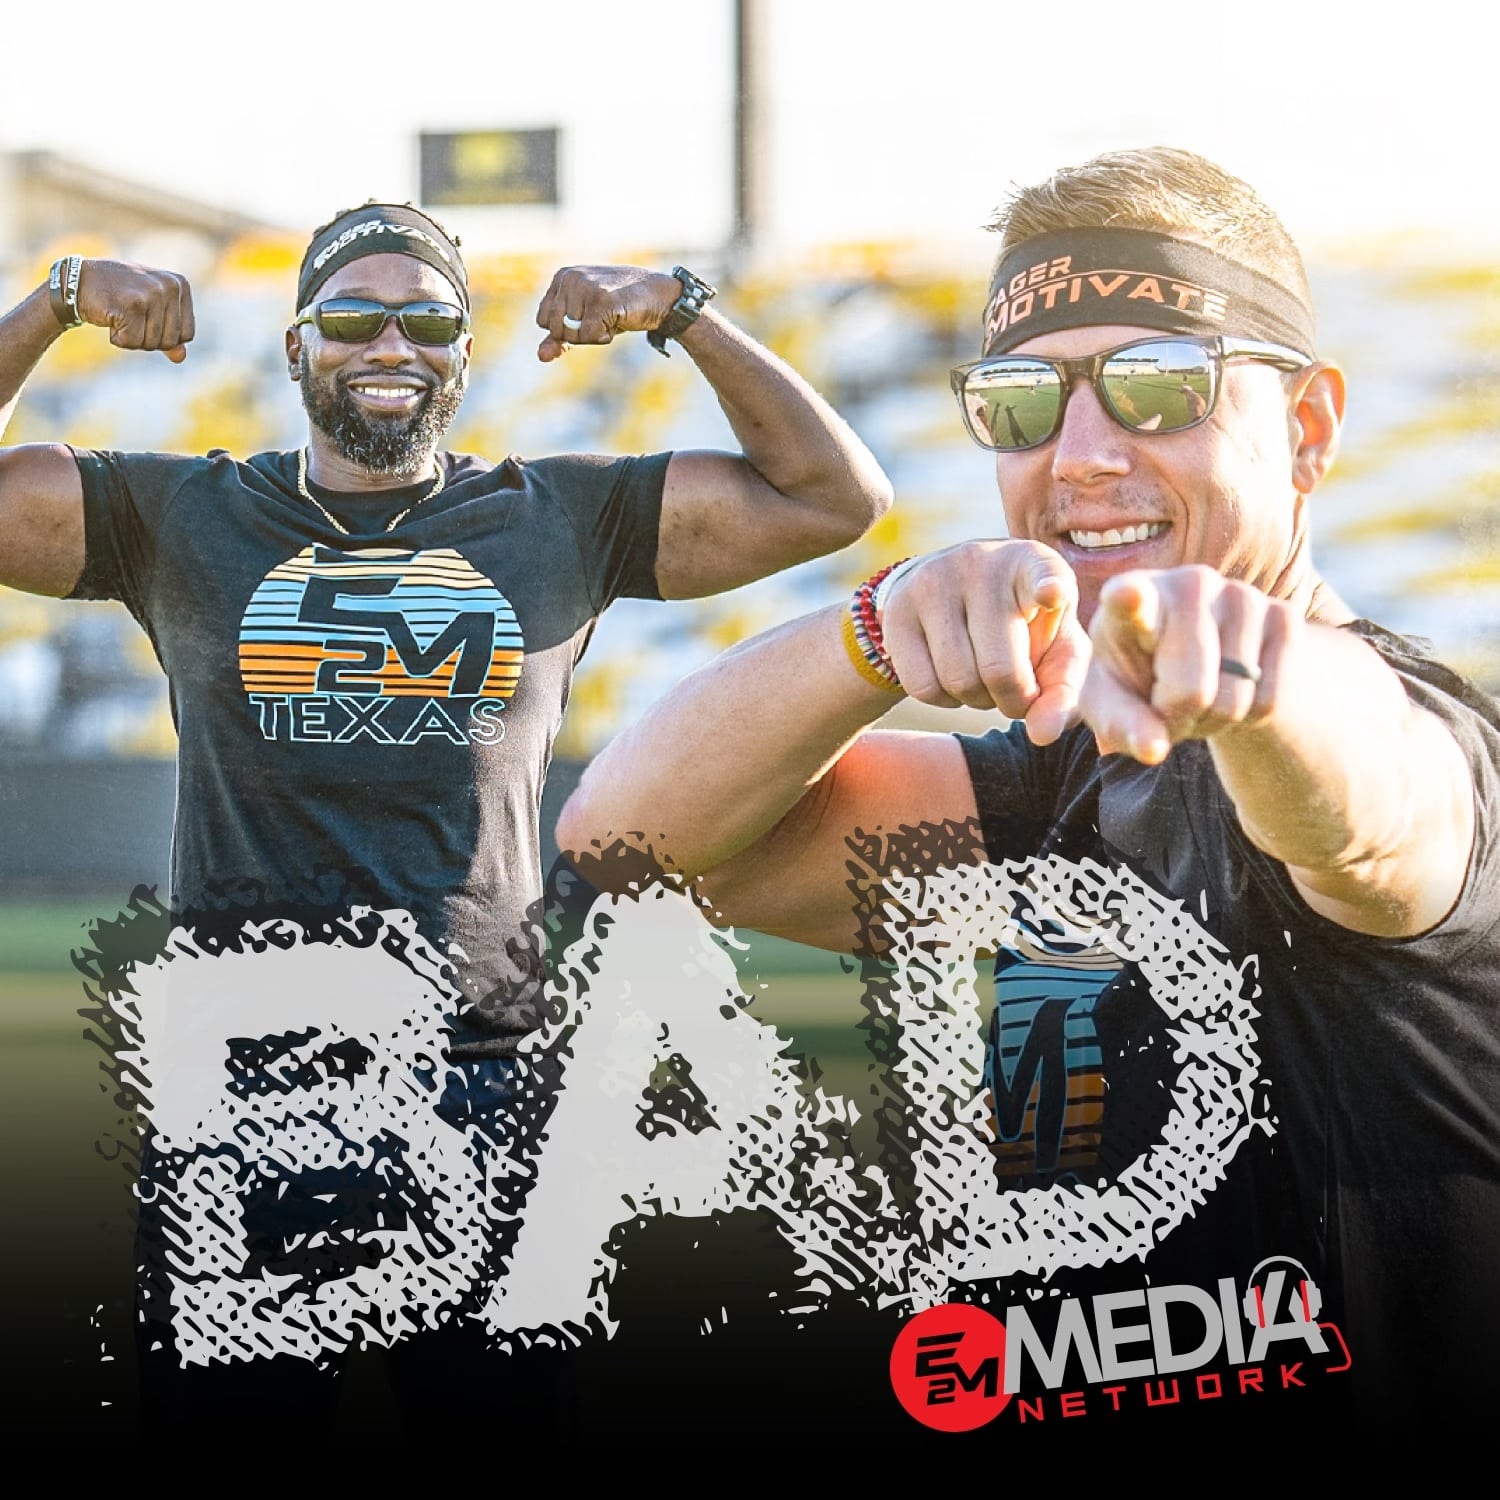 E2M Fitness Media Network – BAD Podcast – Teamwork makes the Dream Work “Your Rock”